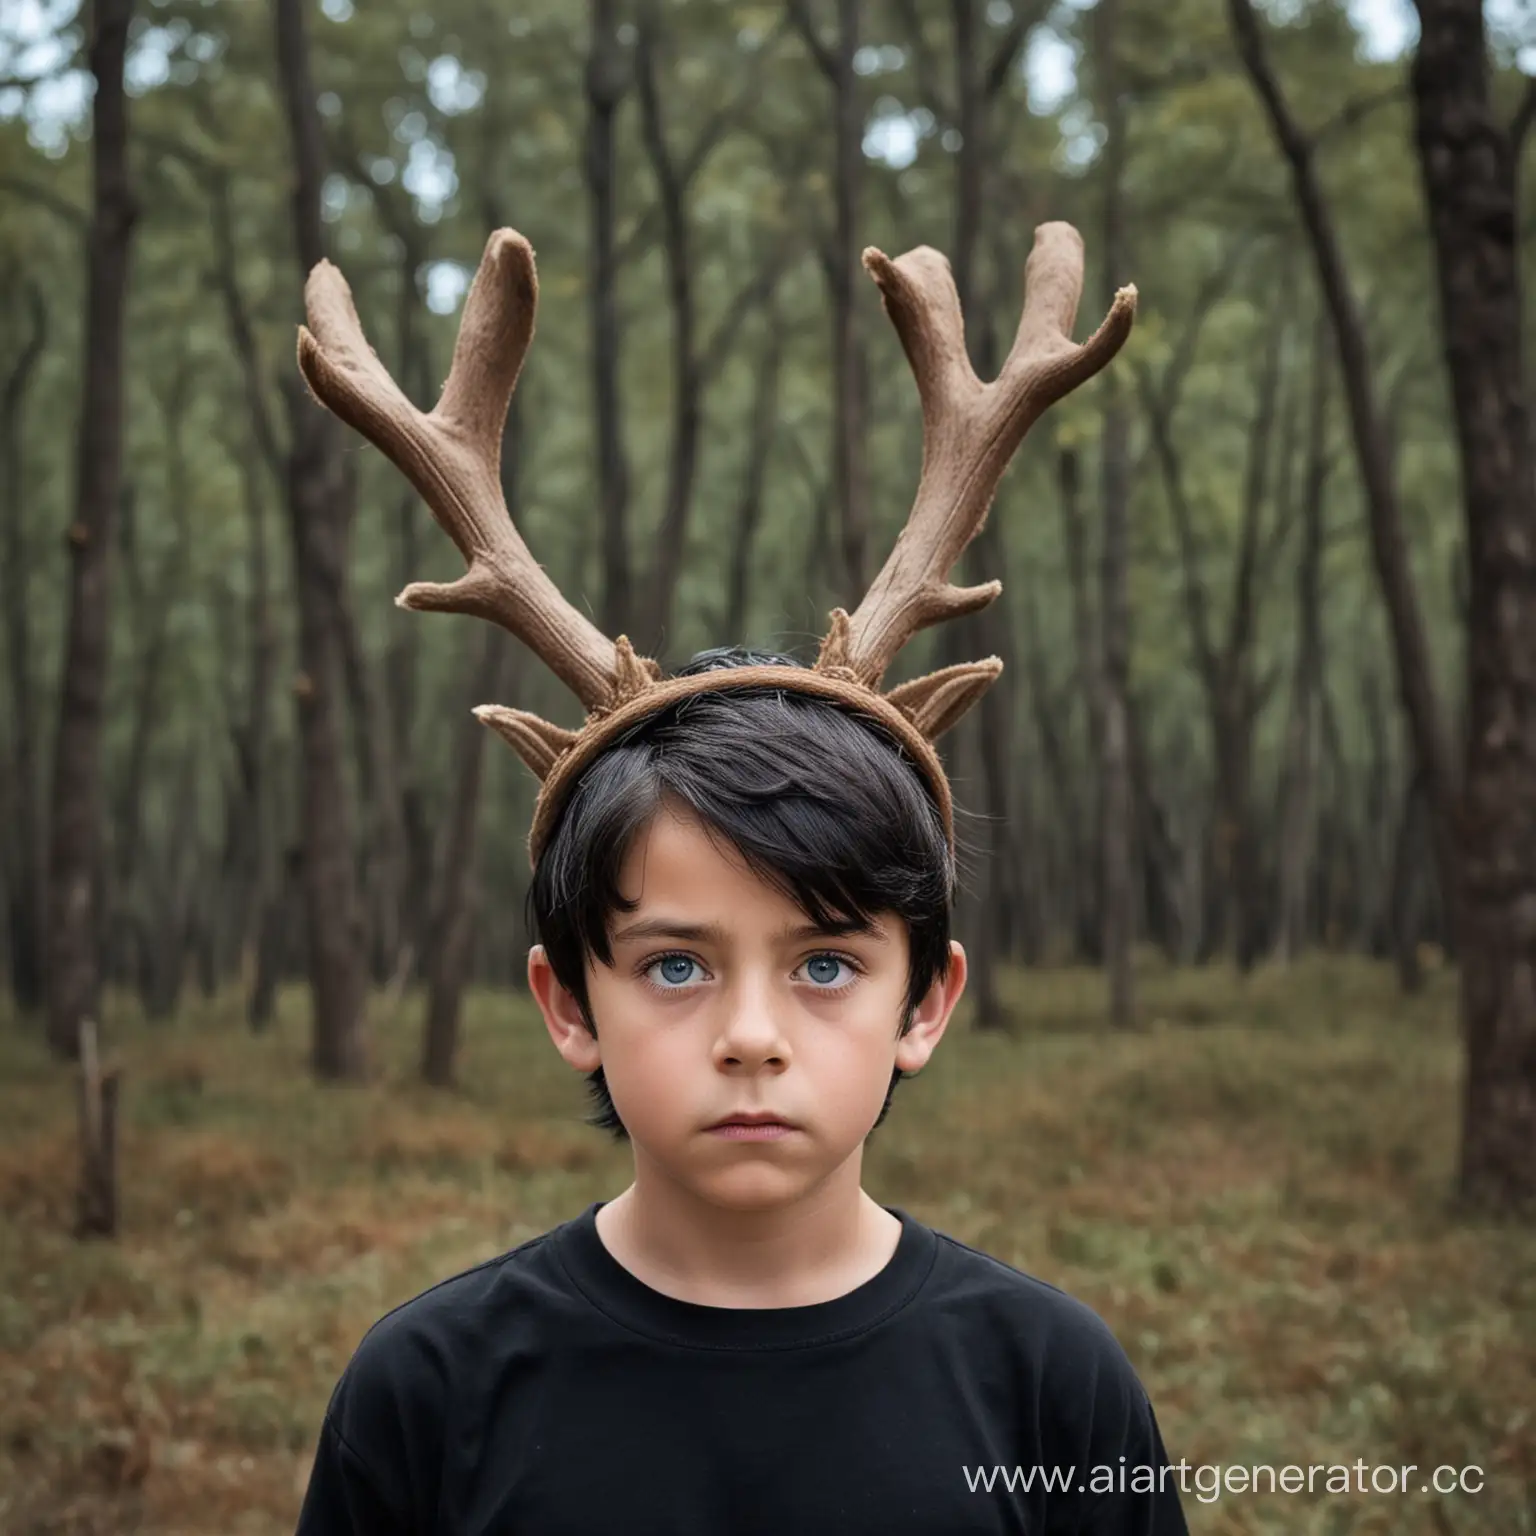 Portrait of a boy with black hair and expressive blue eyes, serious expression, wearing a black shirt, with reindeer antlers, nature background, dramatic daytime lighting